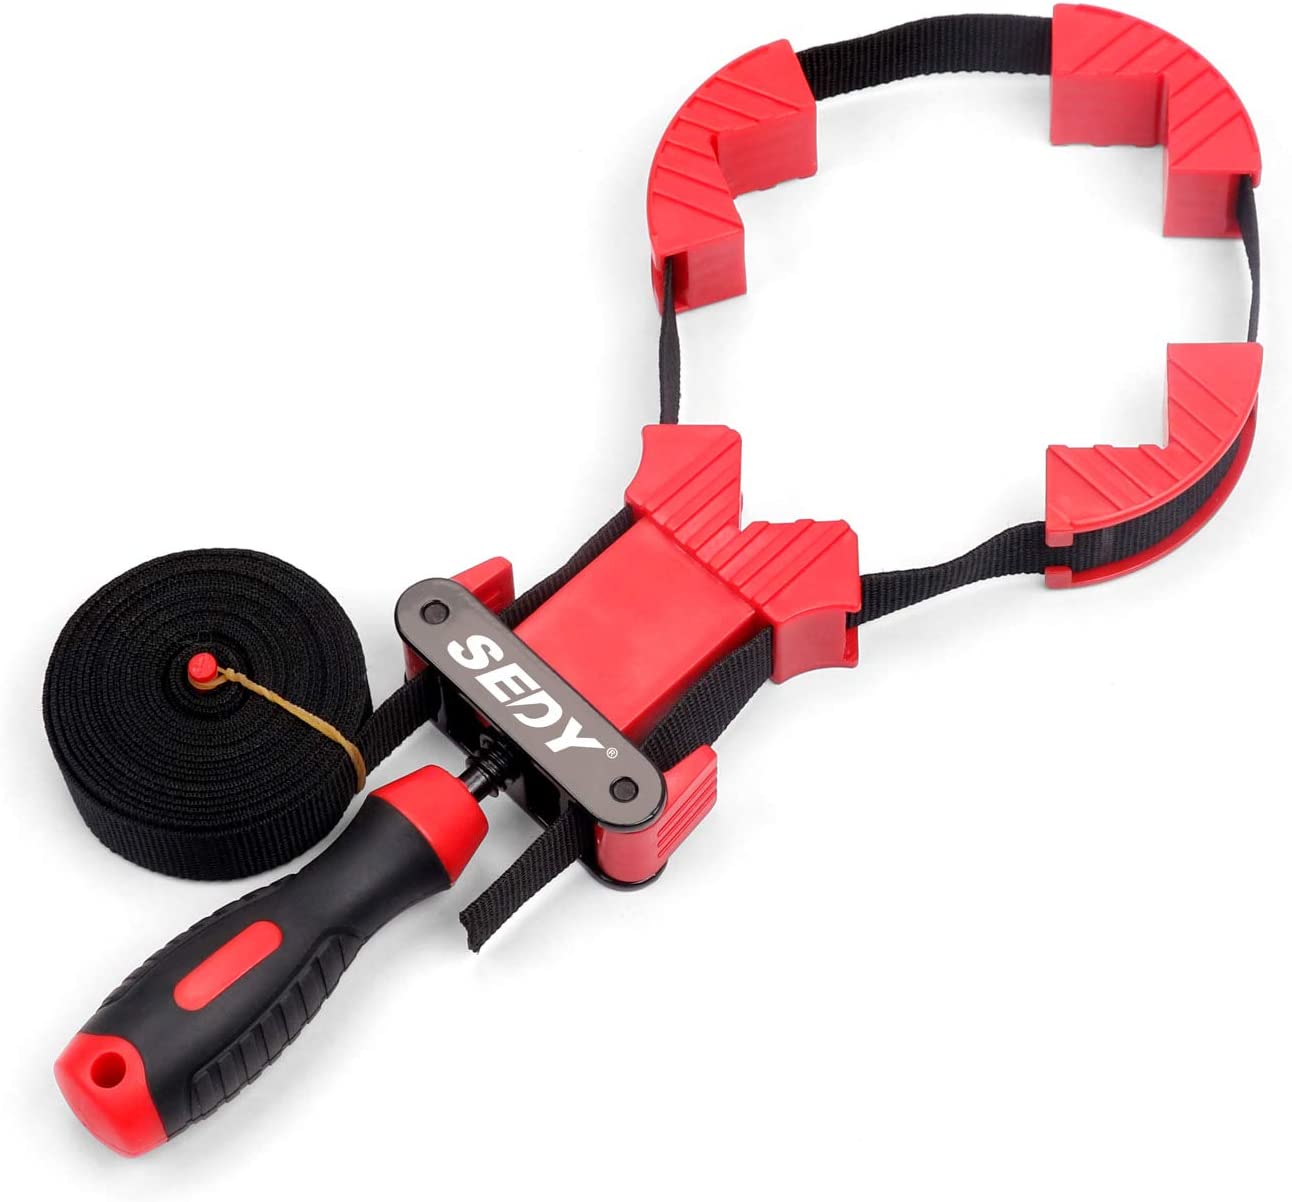 14 Invaluable Tools to Have on Hand When Doing Home Projects Alone SEDY band clamp